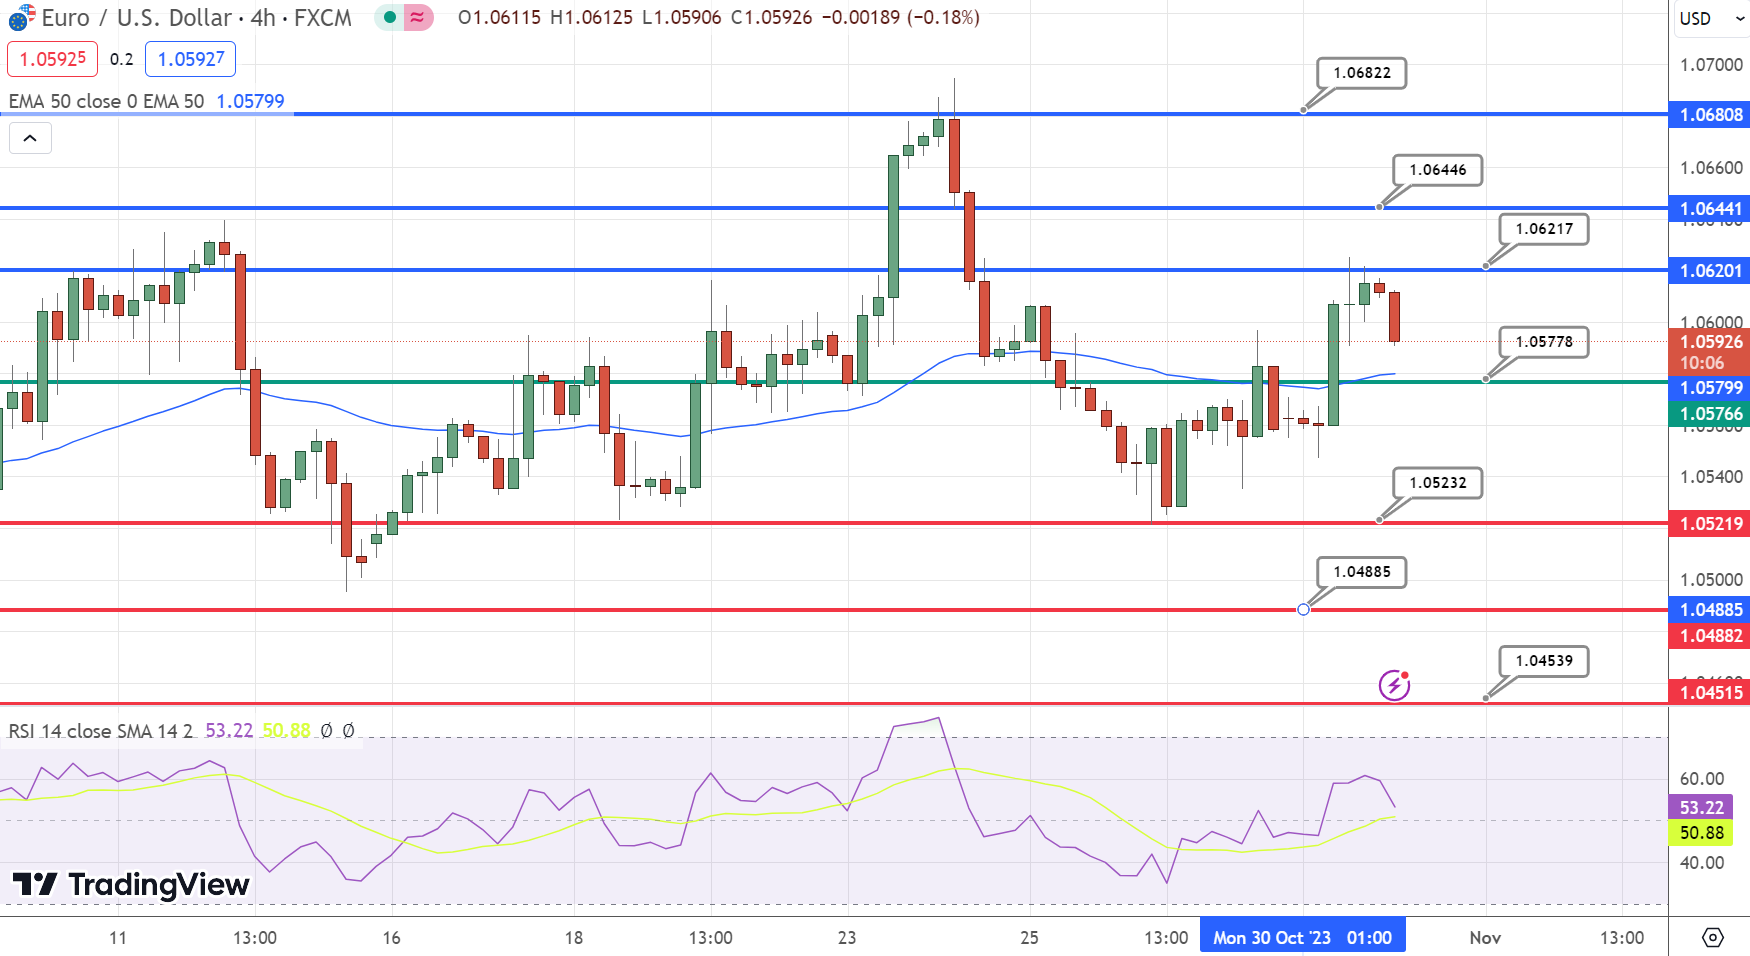 EUR/USD Analysis: Fed’s Hawkish Stance Versus ECB’s Uncertainty Weigh on the Pair (edited)